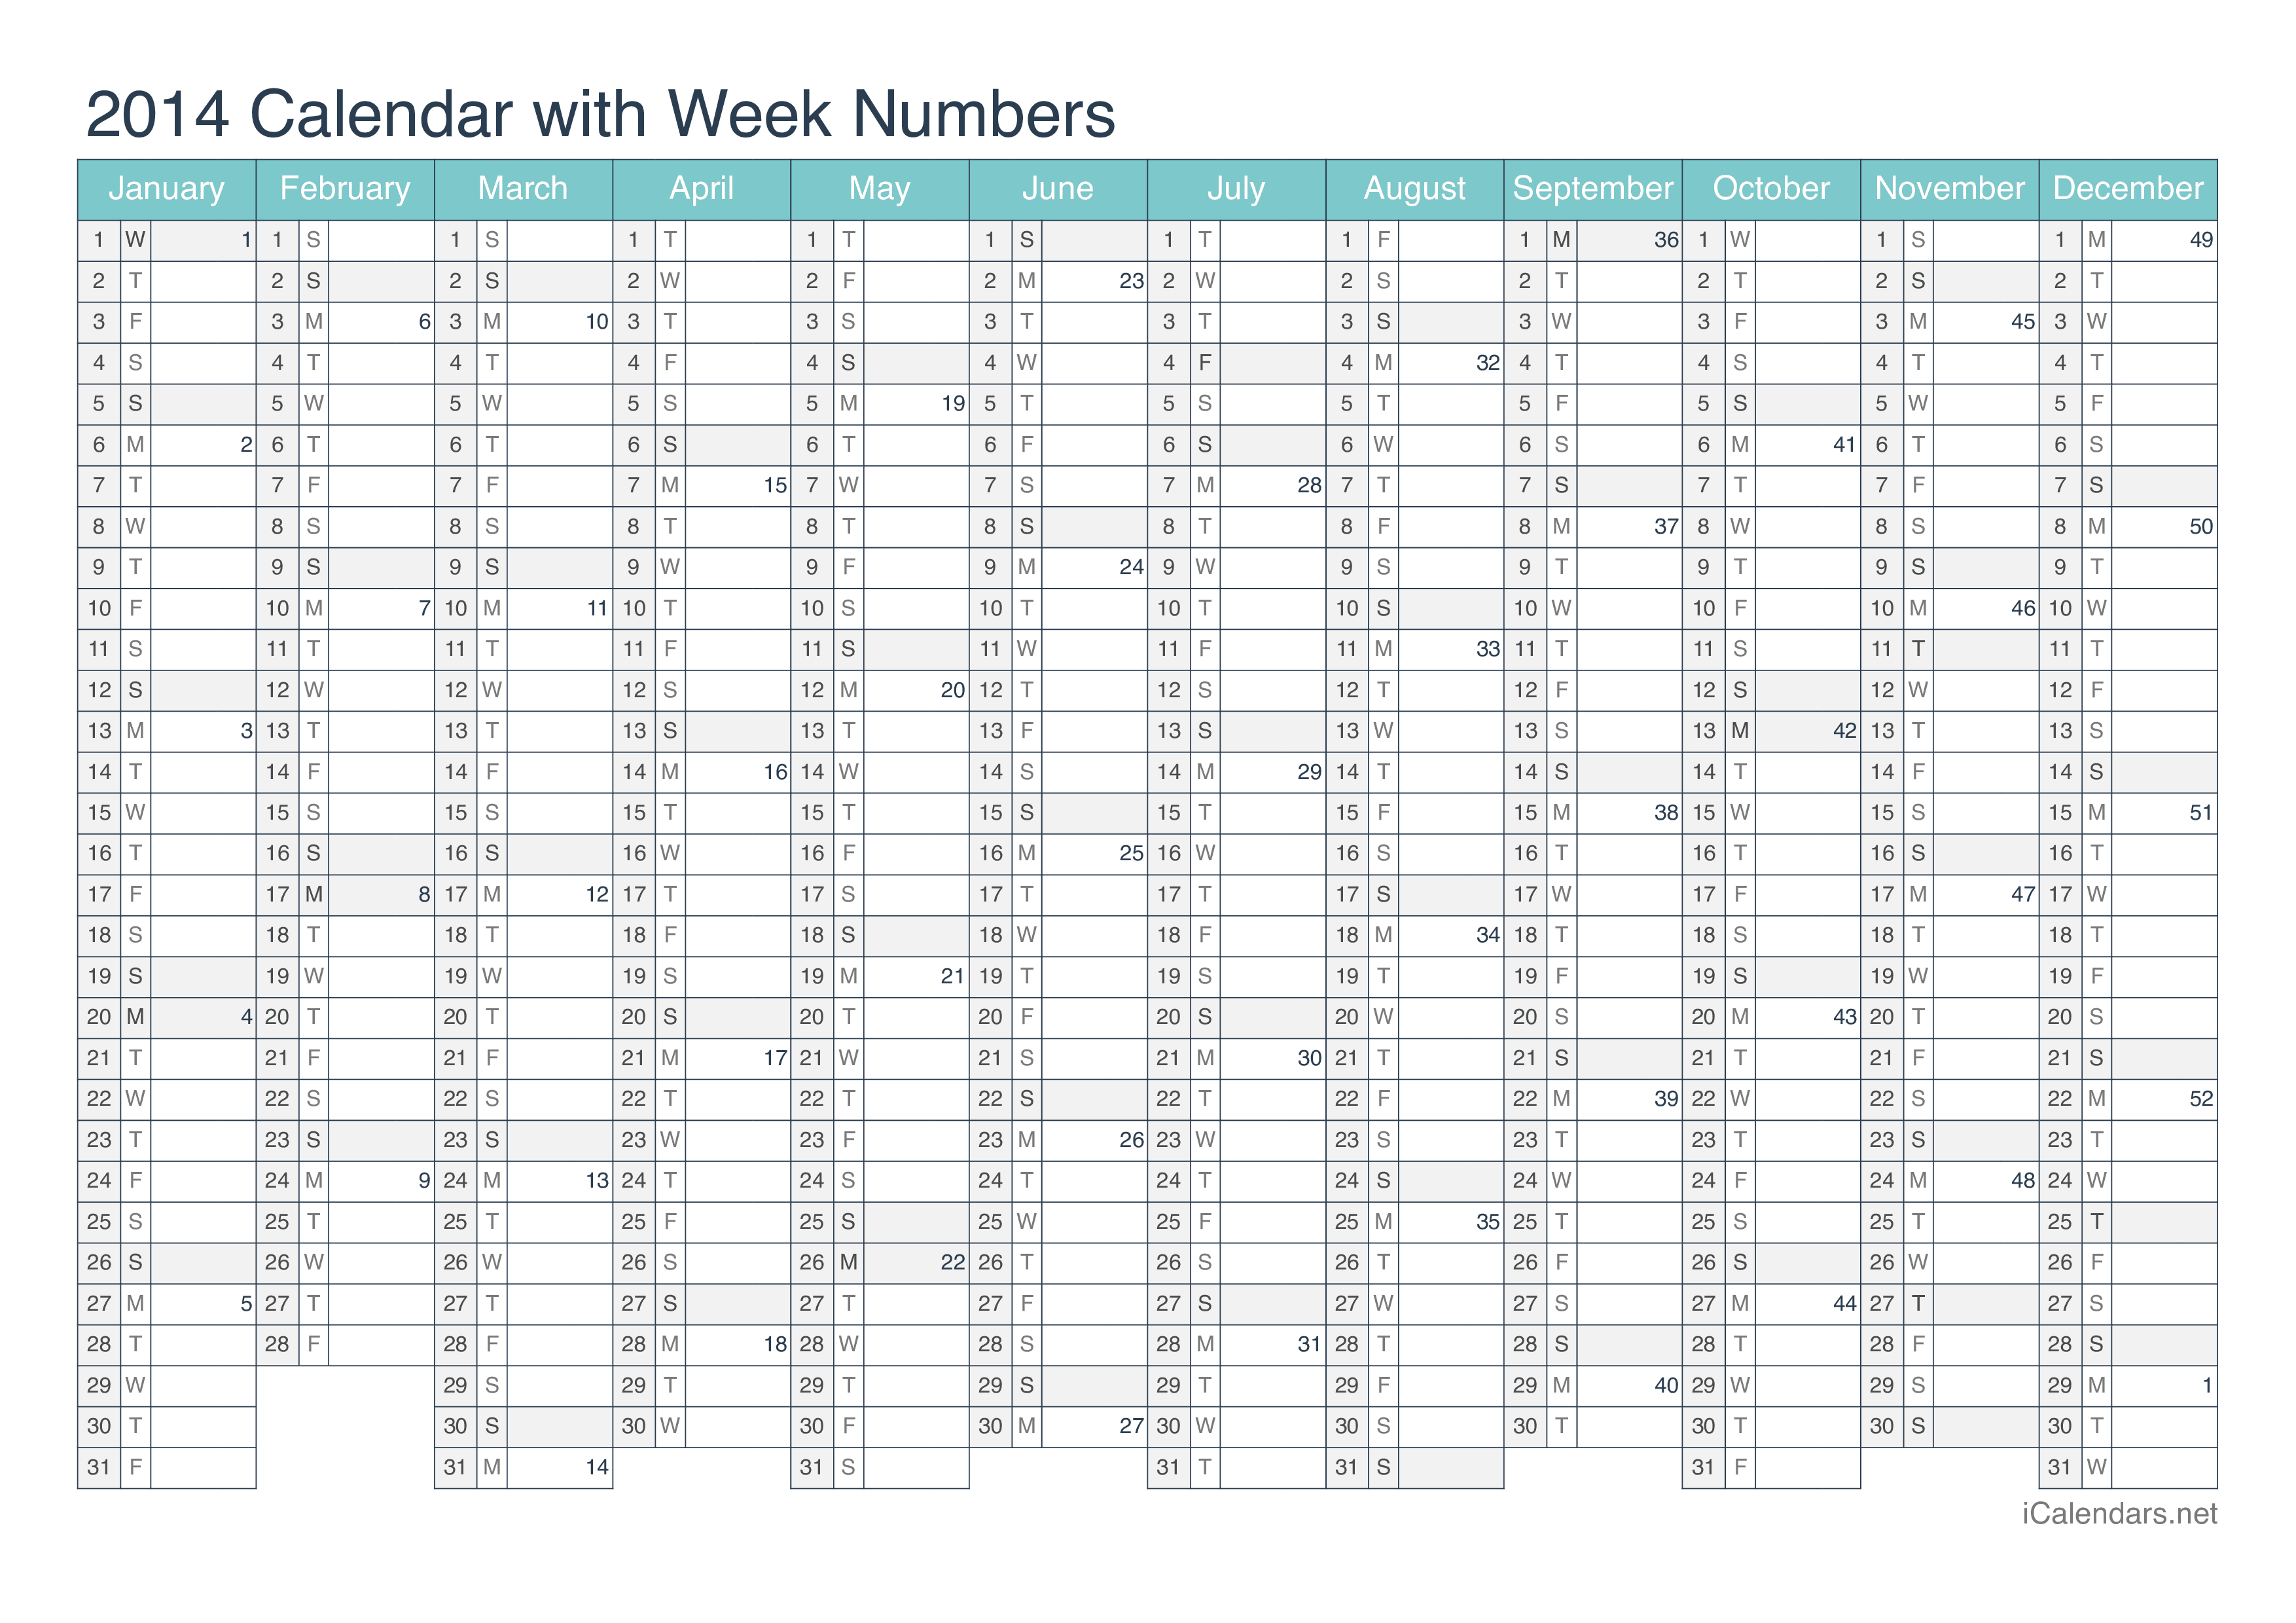 2014 Calendar with week numbers - Turquoise